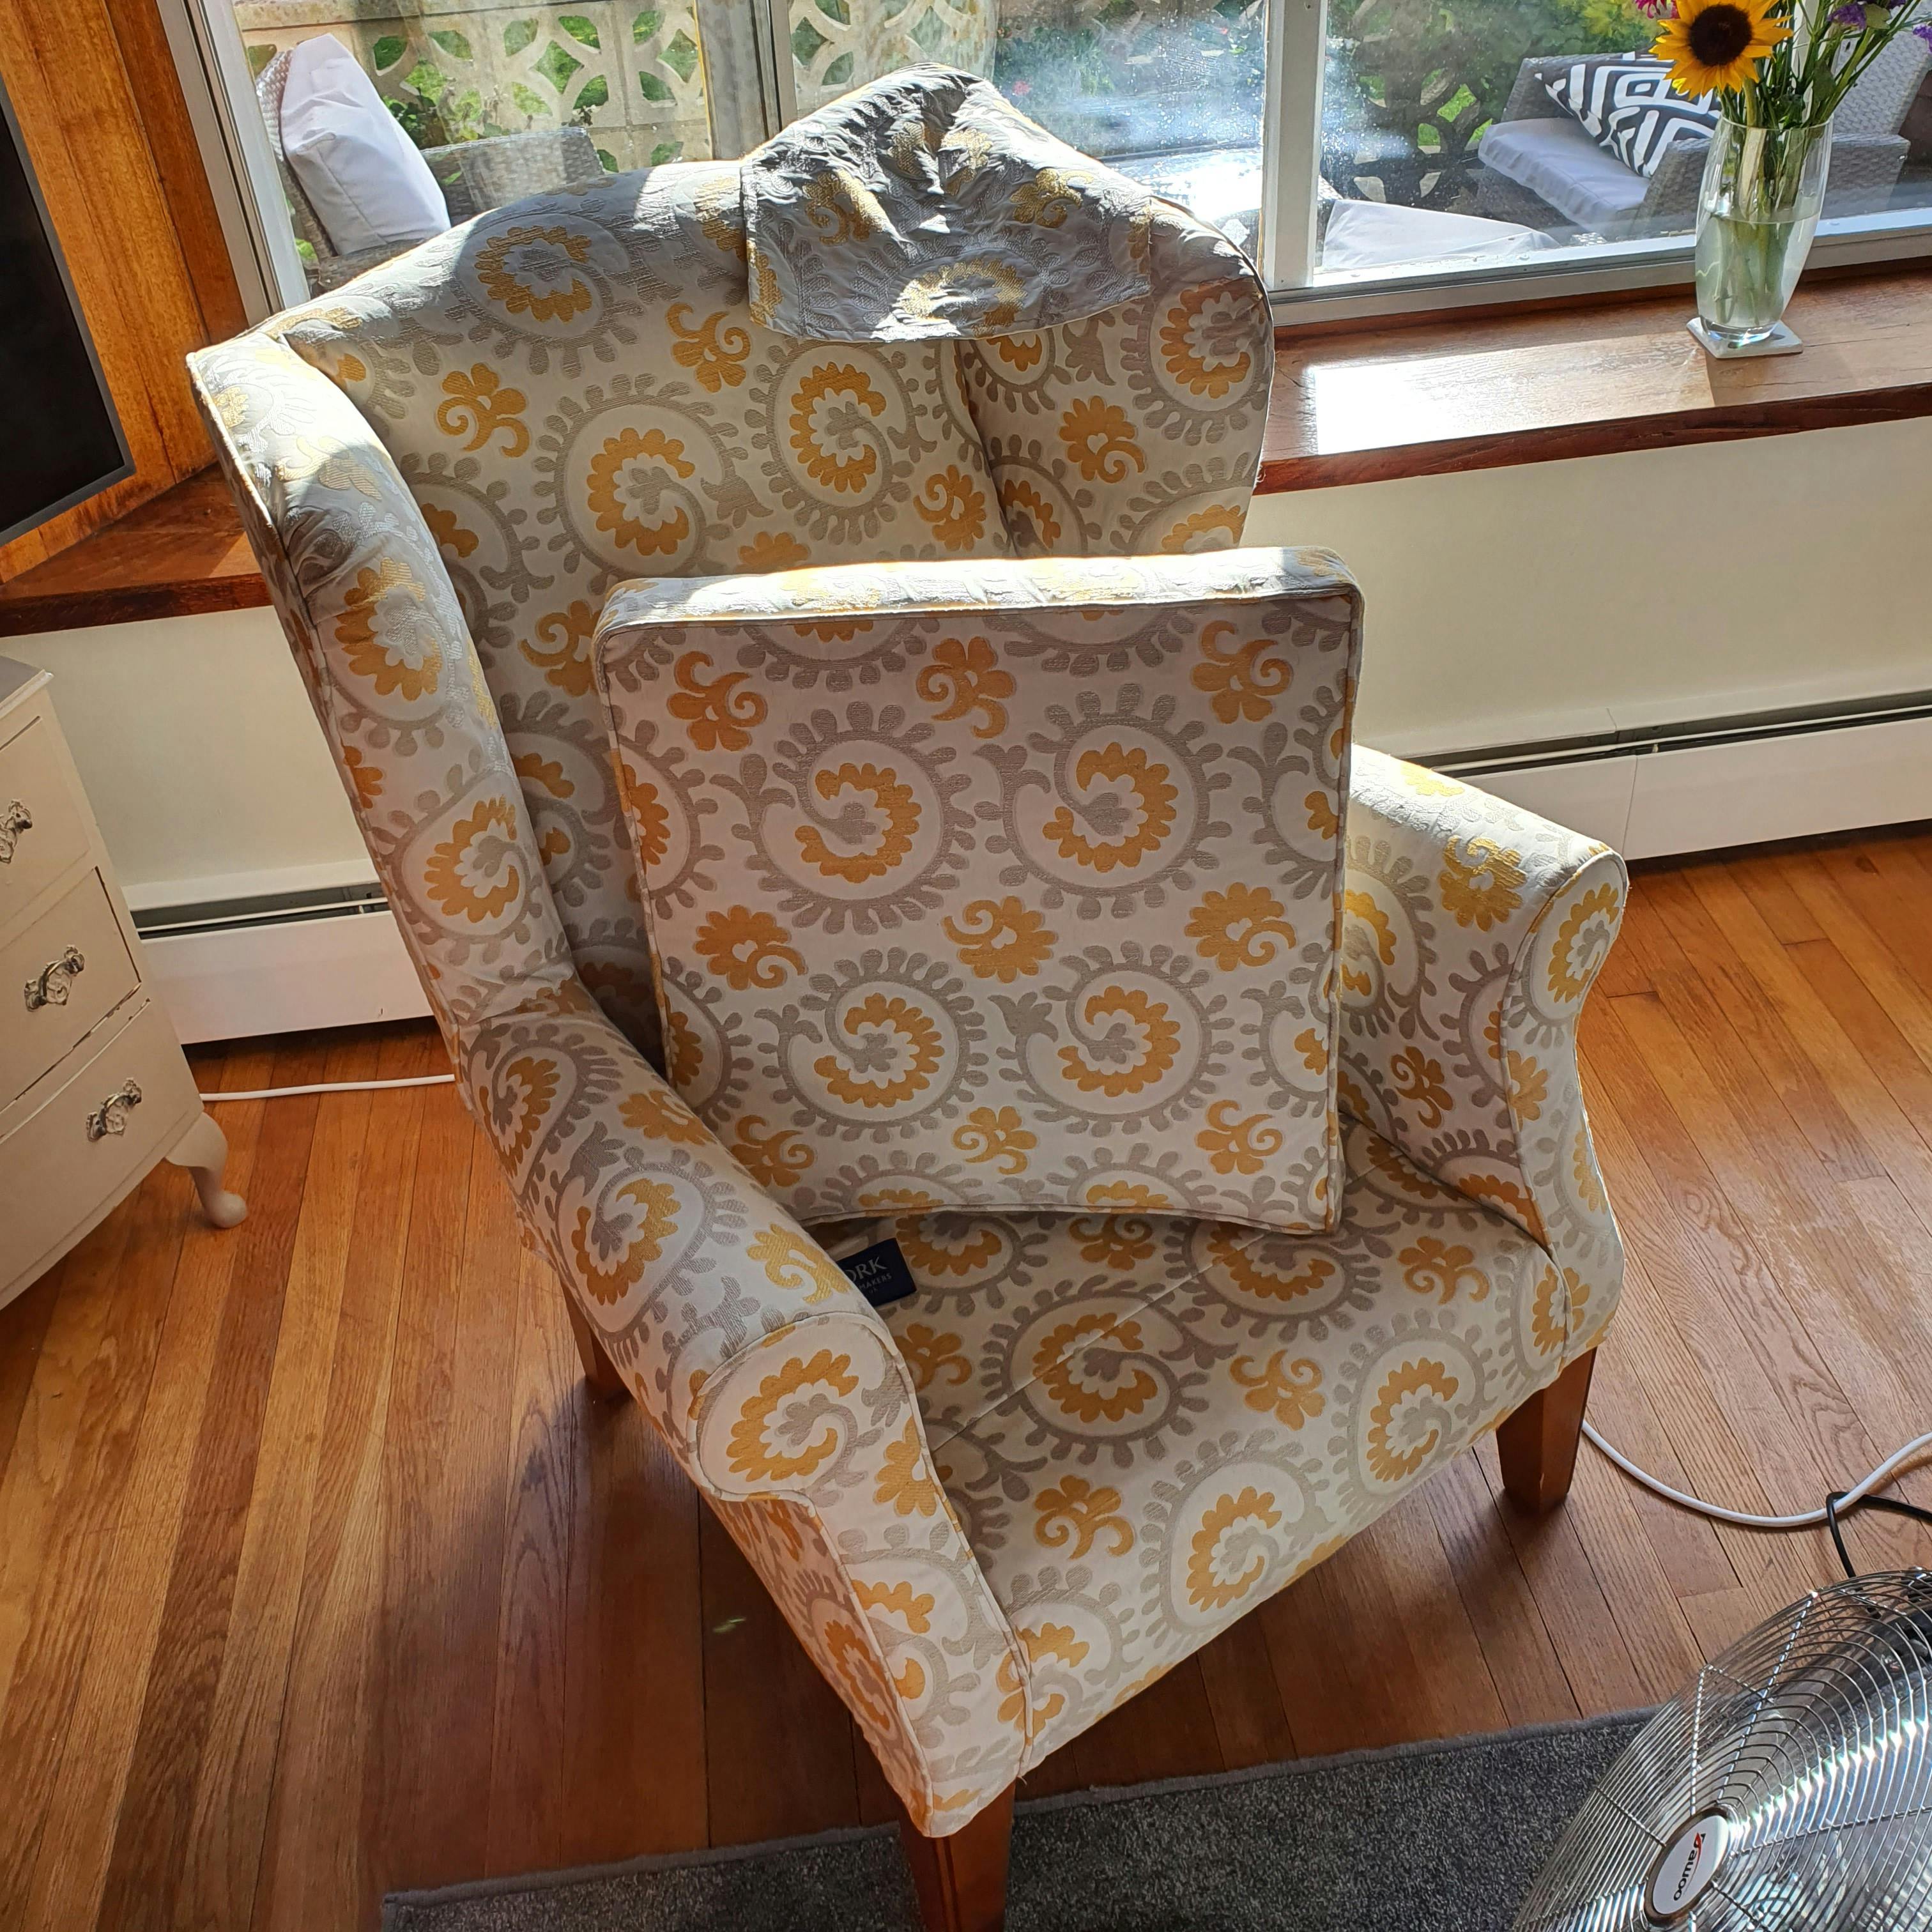 Freshly Cleaned Patterned Armchair by Carpetech Upholstery Services